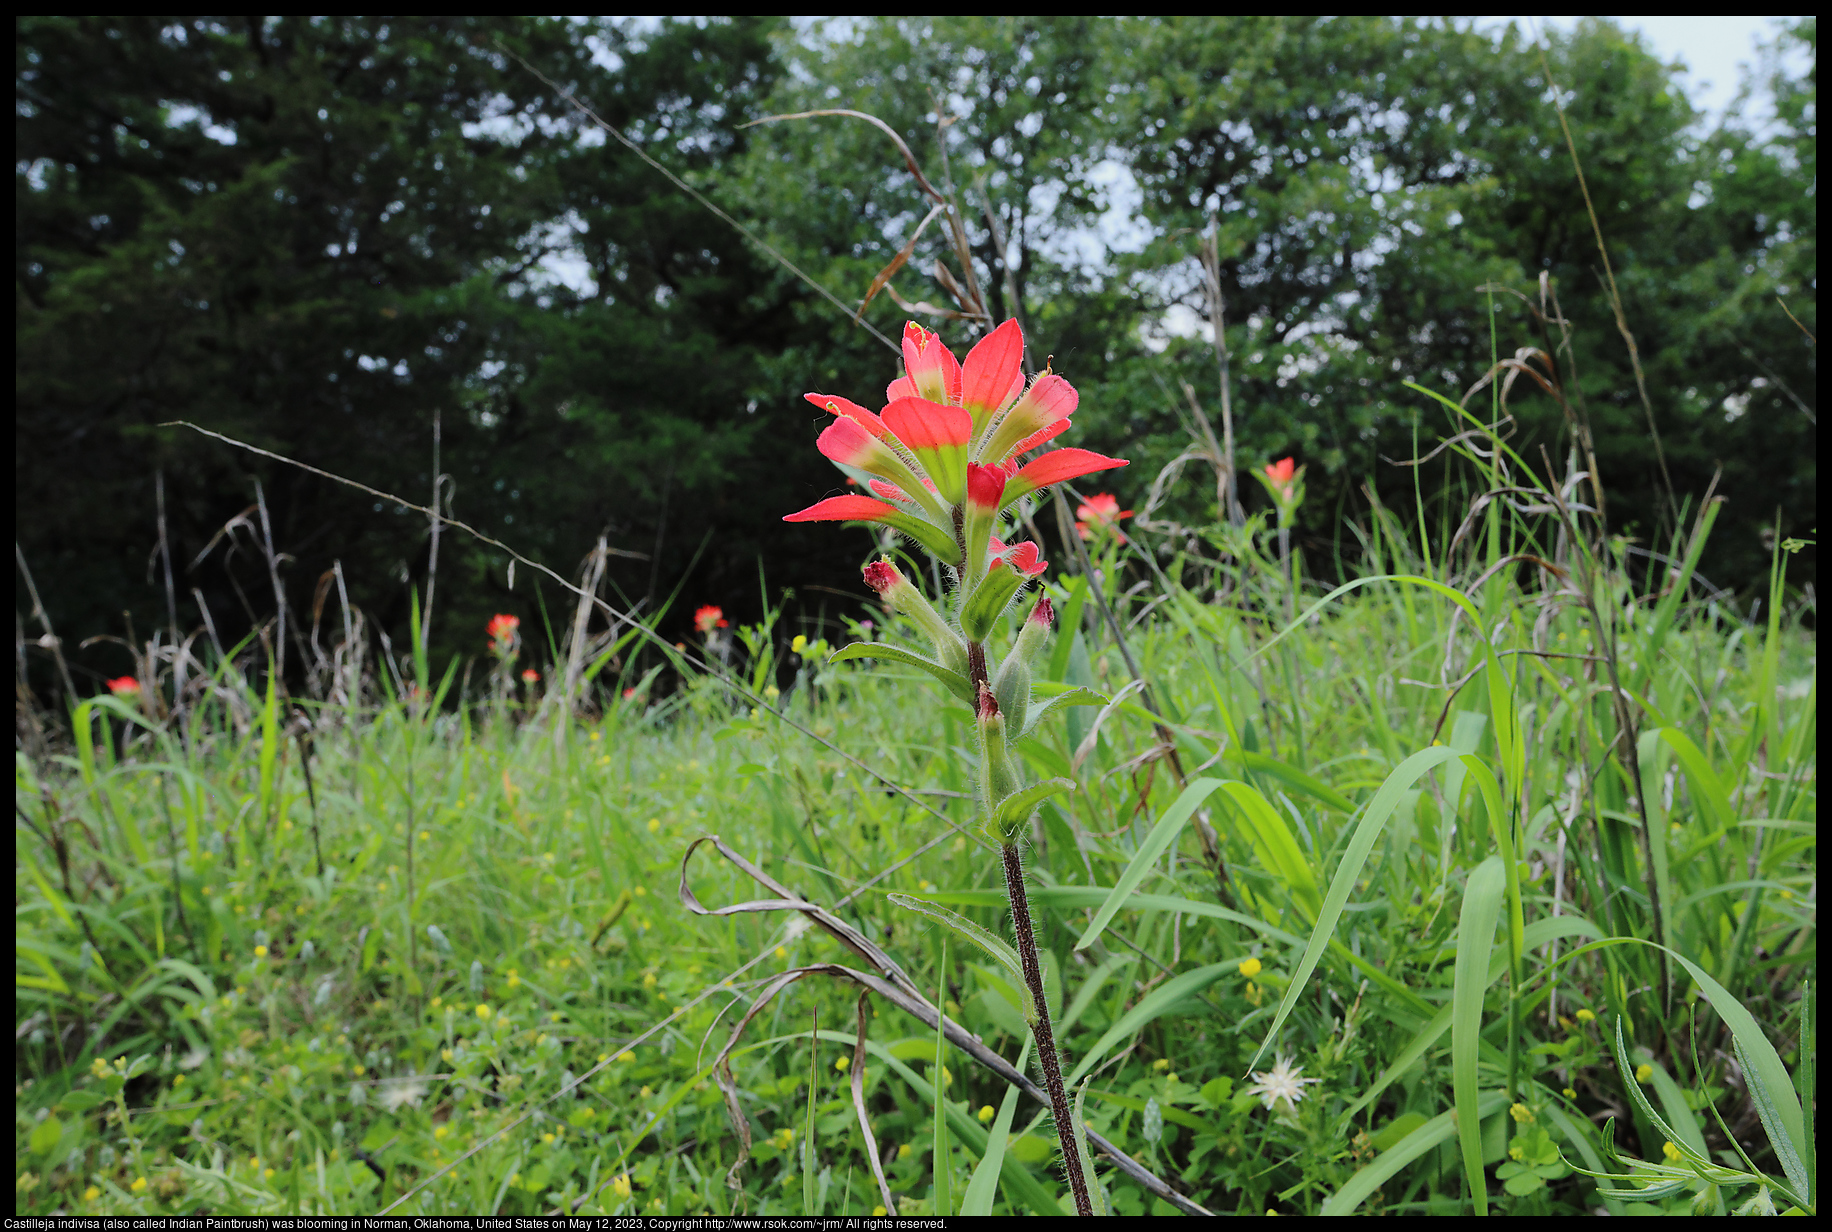 Castilleja indivisa (also called Indian Paintbrush) in Norman, Oklahoma, United States on May 12, 2023